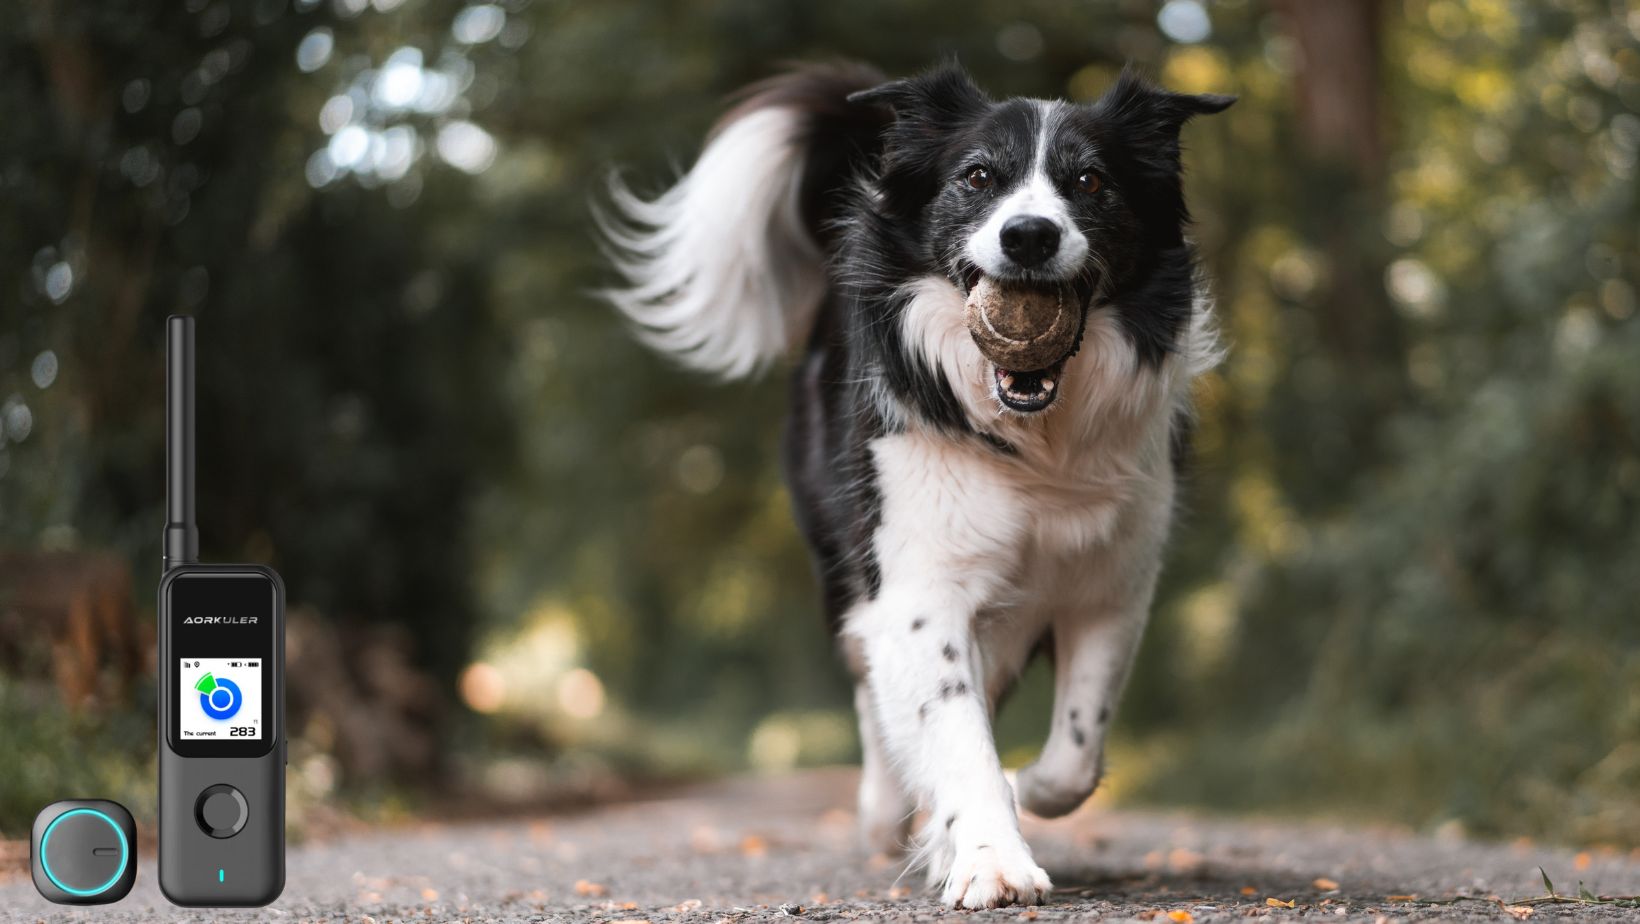 All You Need to Know About Aorkuler GPS Dog Tracking Device